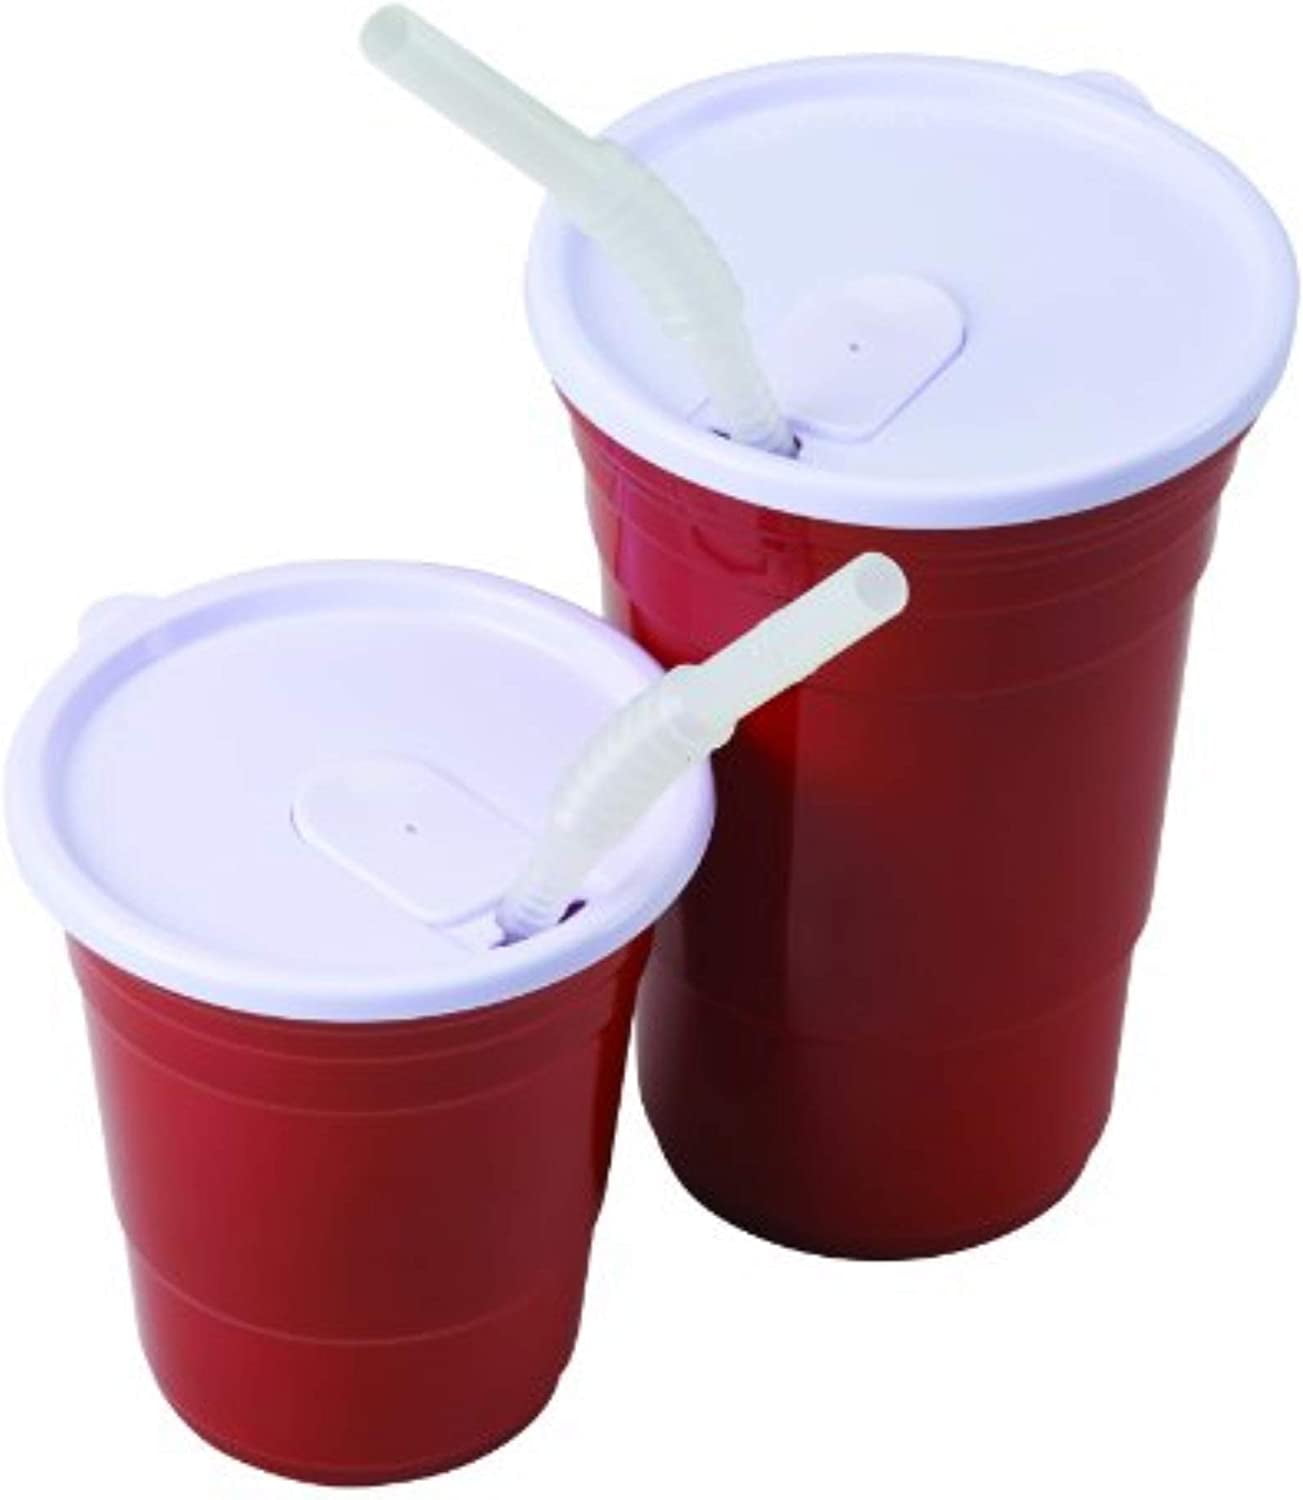 18oz Reusable Red Party Cup  Best Red Party Cups – Redcupliving